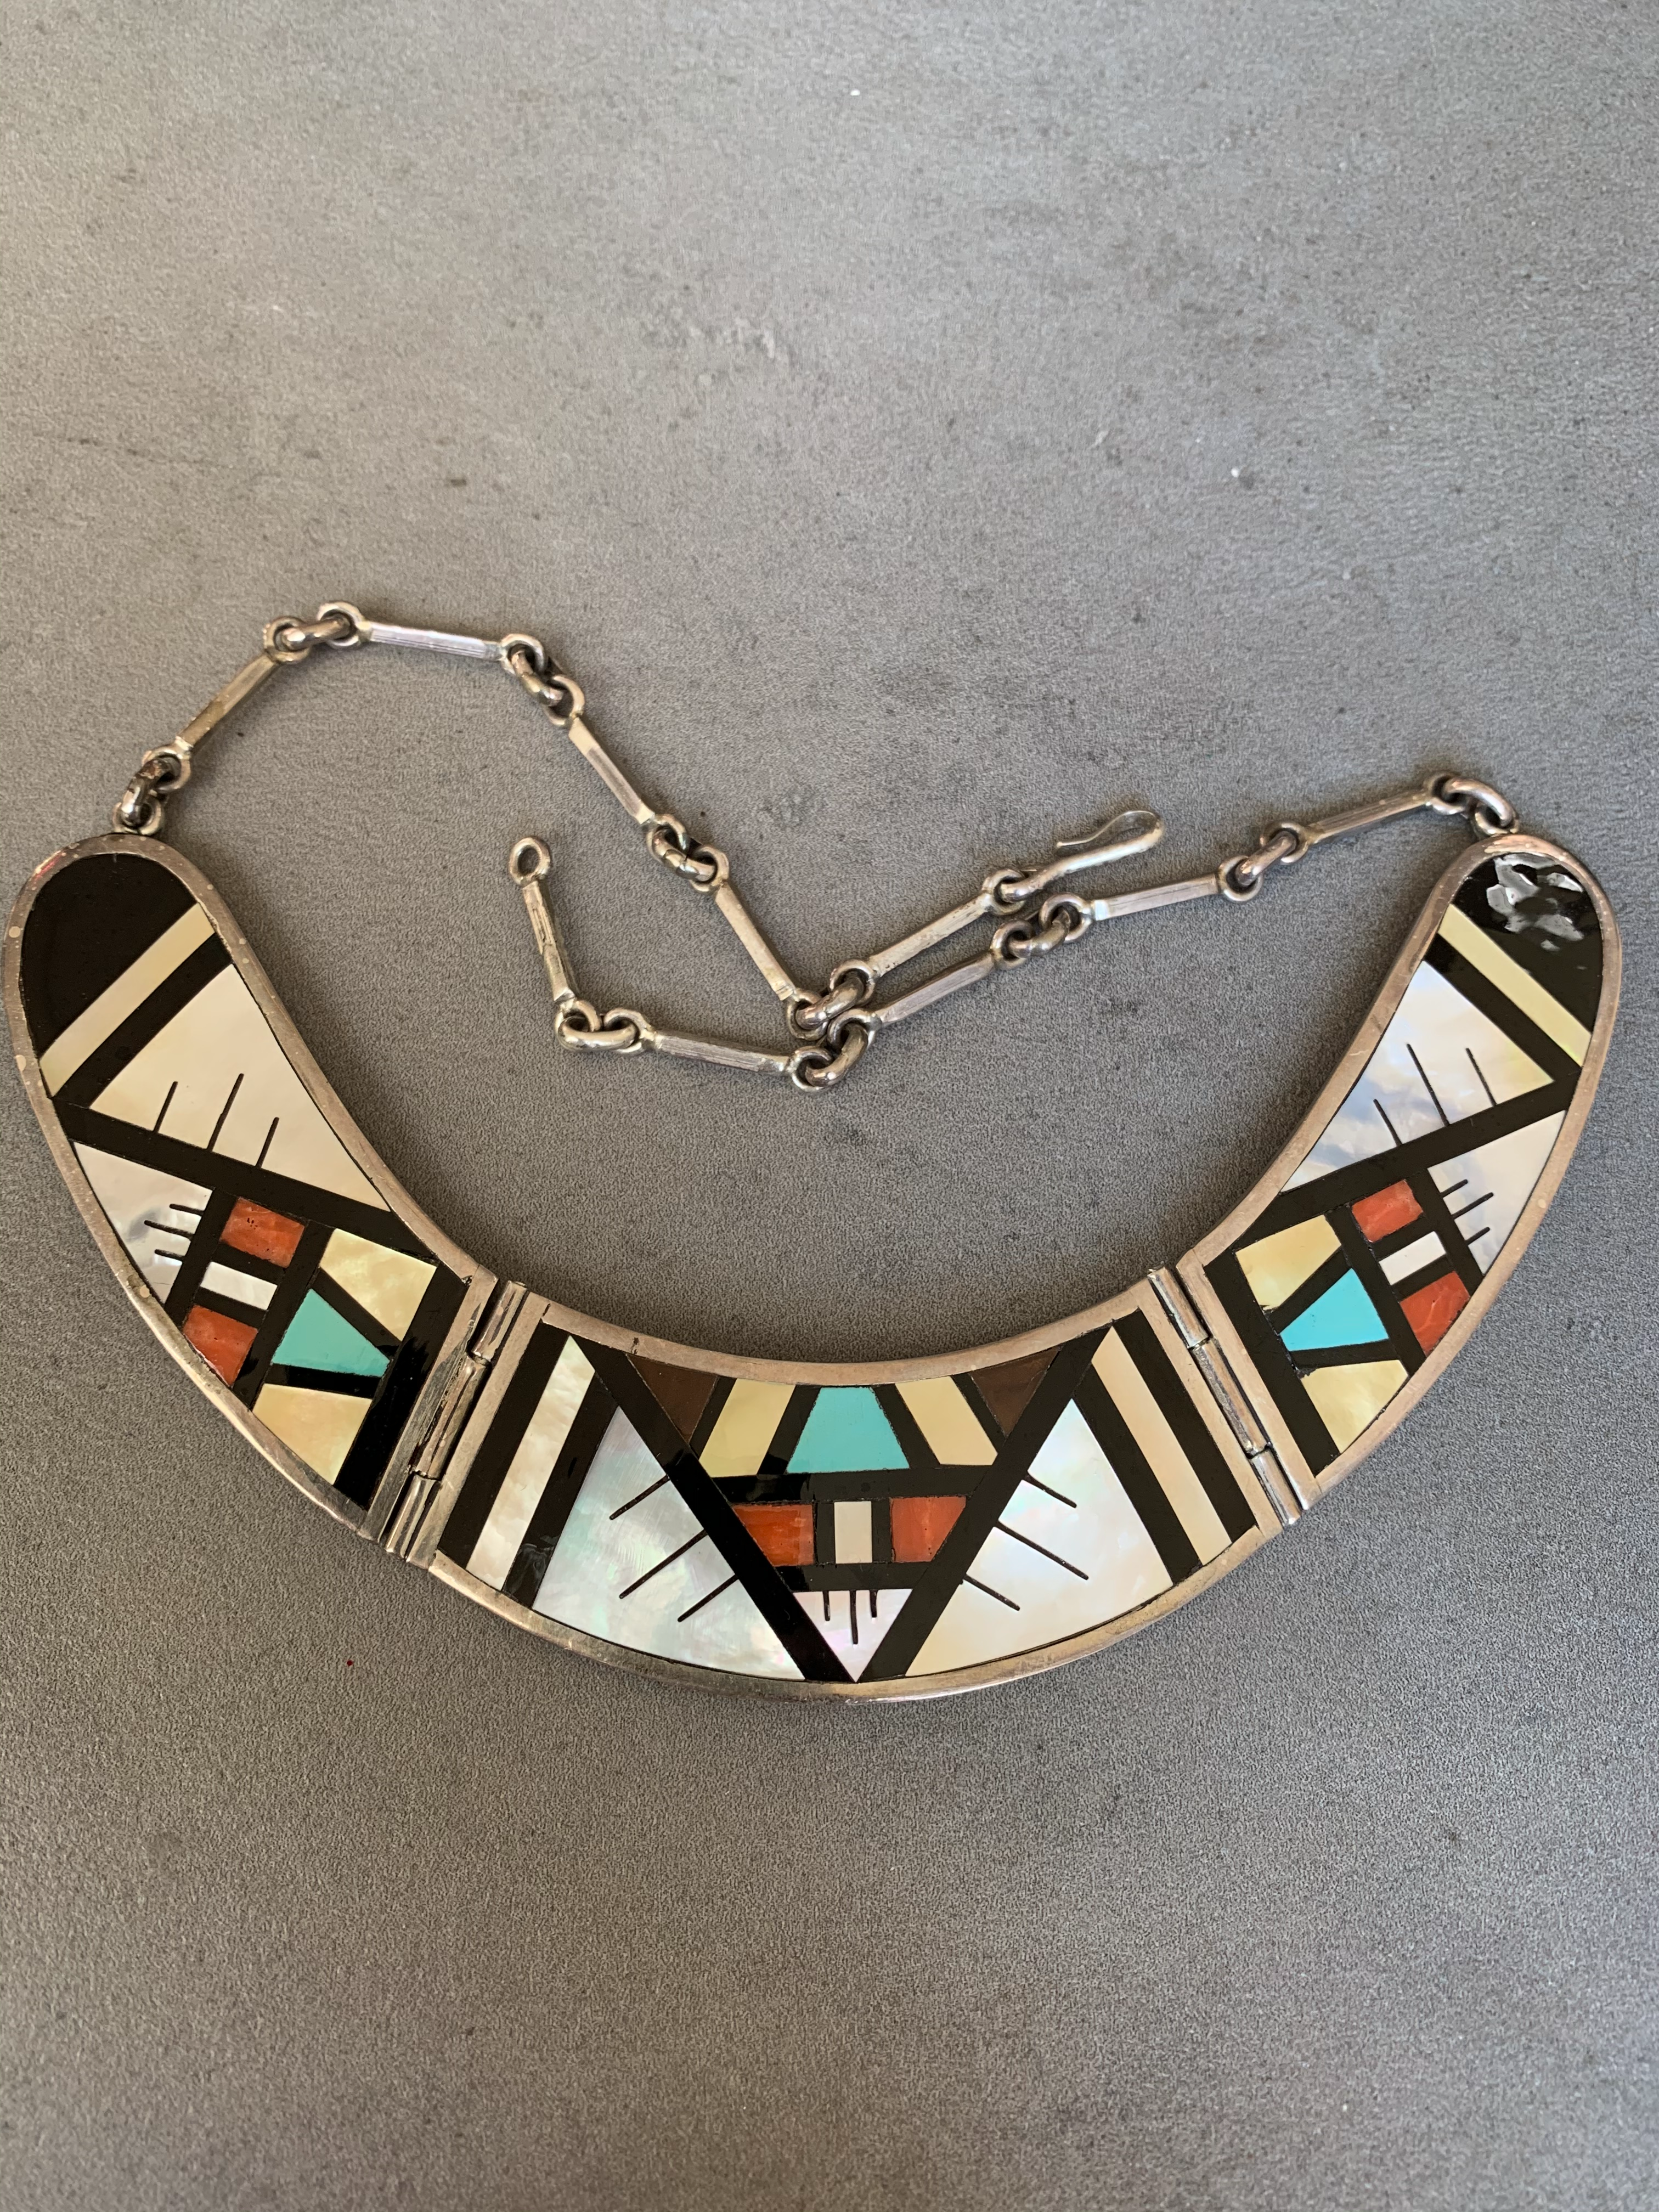 Zuni Inlay Necklace Sterling multi stone by Sue